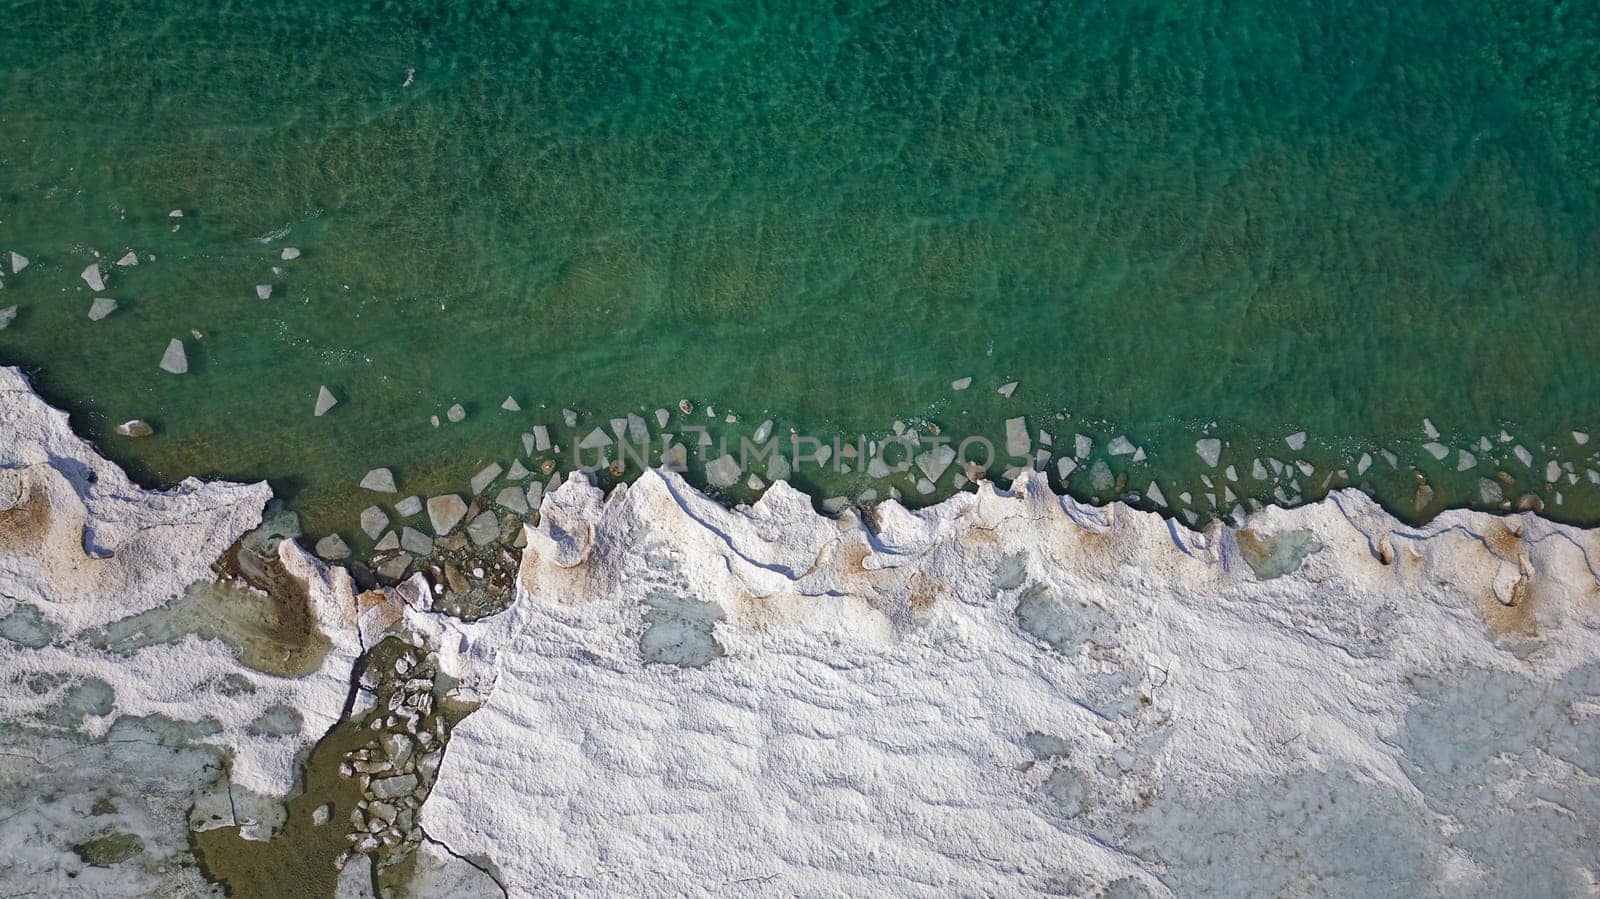 Drone shot of Georgian Bay Ice Pack Breaking Up and Melting in February due to Warming Climate